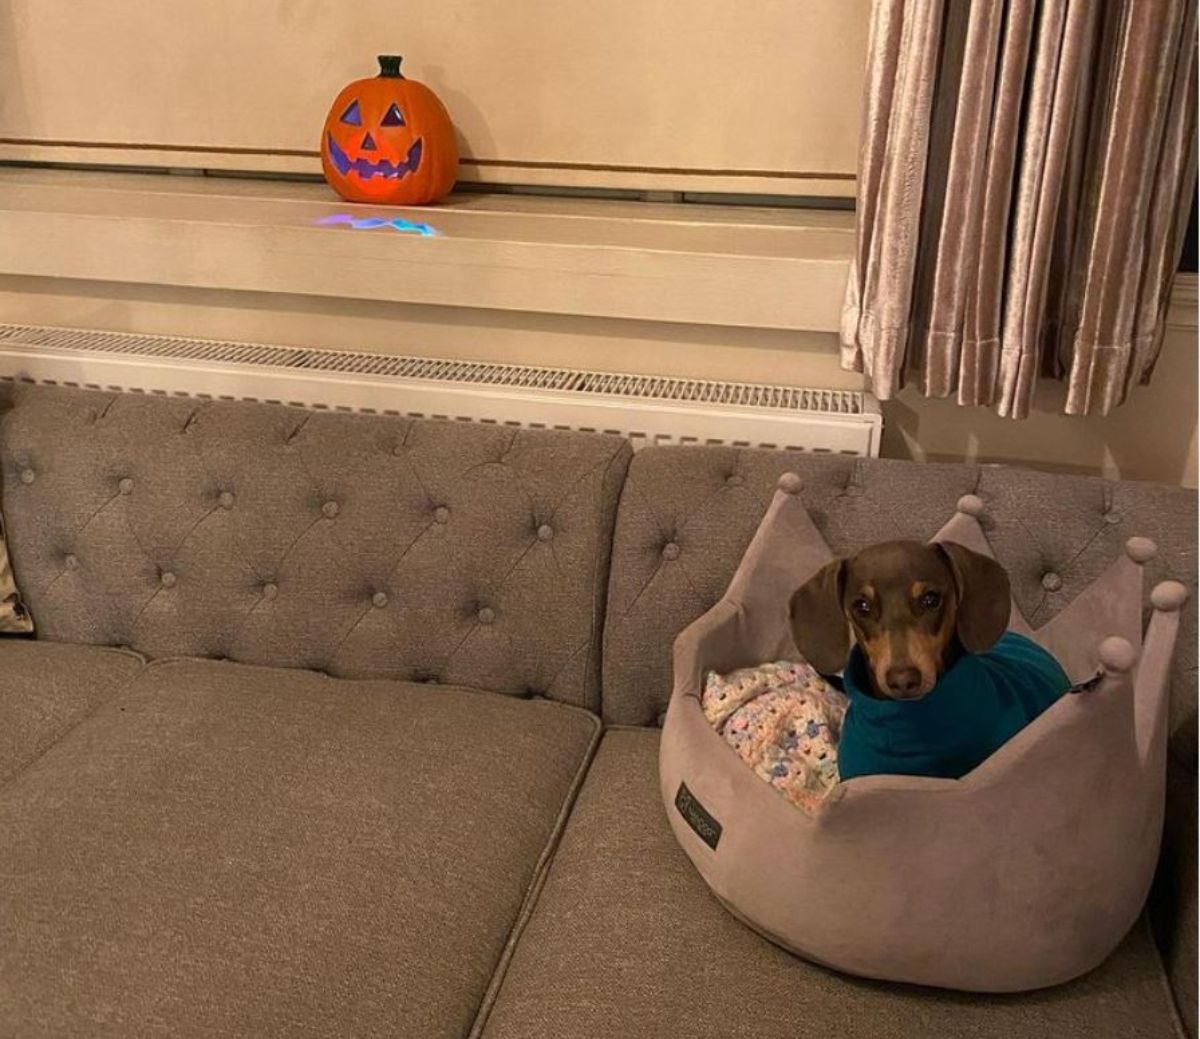 brown dachshund sitting in a brown crown bed on a brown couch near an orange jack o' lantern